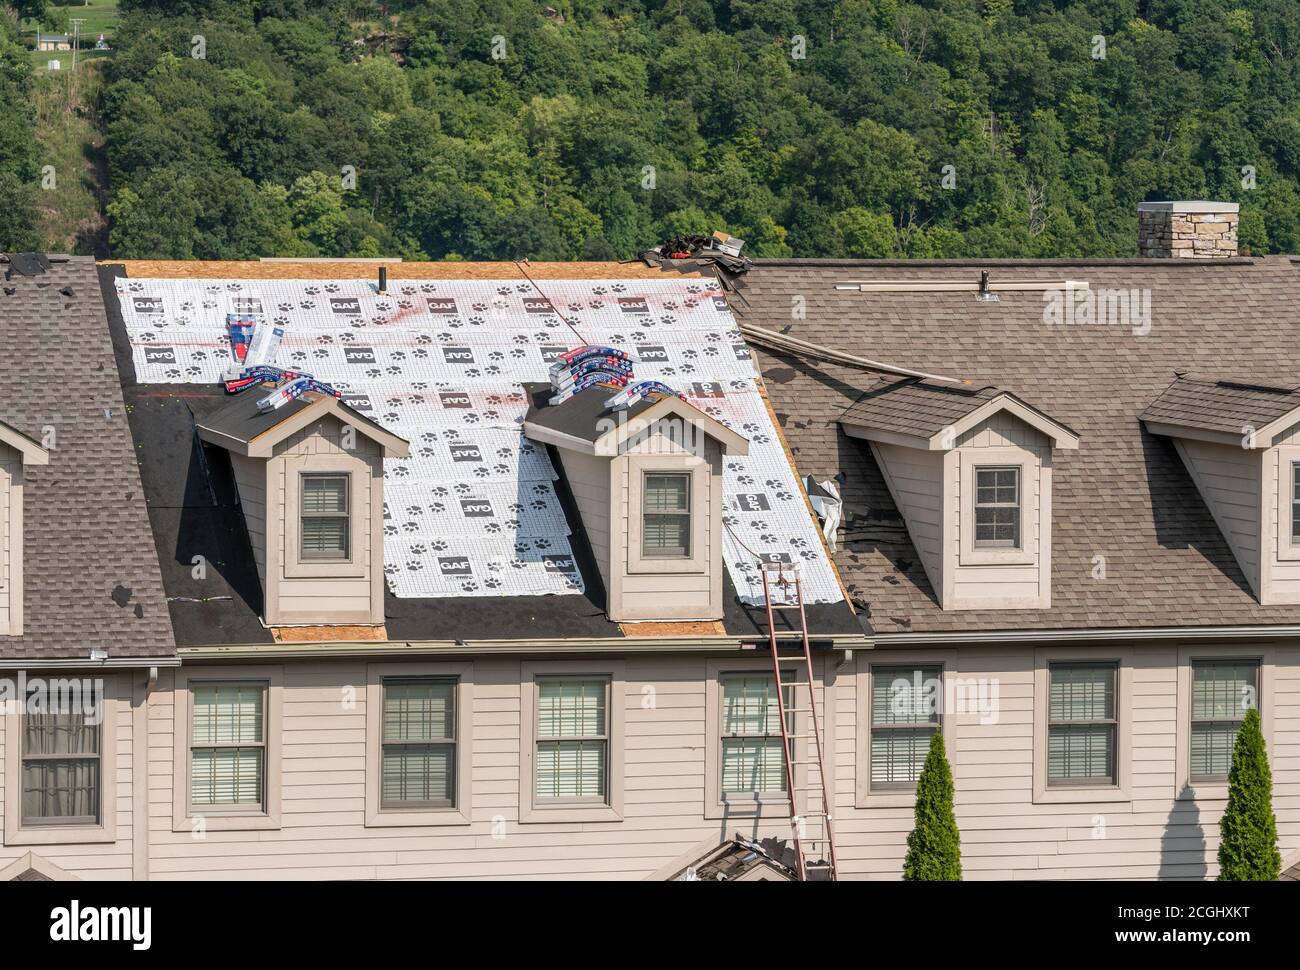 Morgantown, WV - 10 September 2020: Roofing contractor has laid waterproof liner on townhouse roof before adding the new shingles Stock Photo